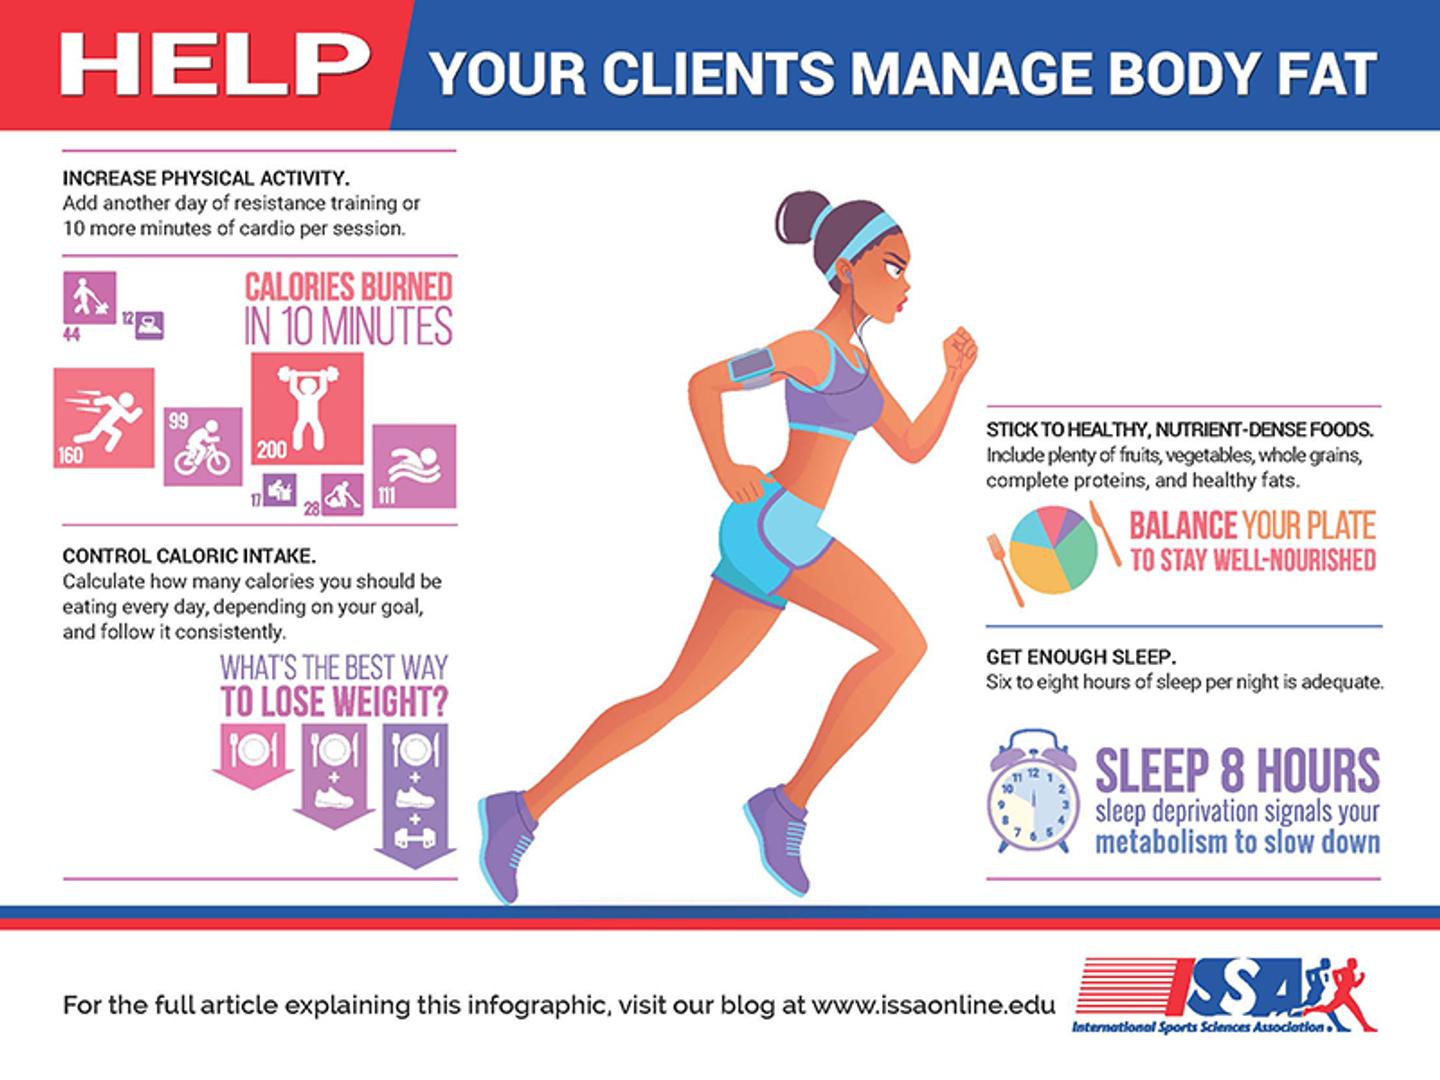 ISSA, International Sports Sciences Association, Certified Personal Trainer, ISSAonline, Nutrition, The Scary Connection Between Obesity and Cancer, Infographic